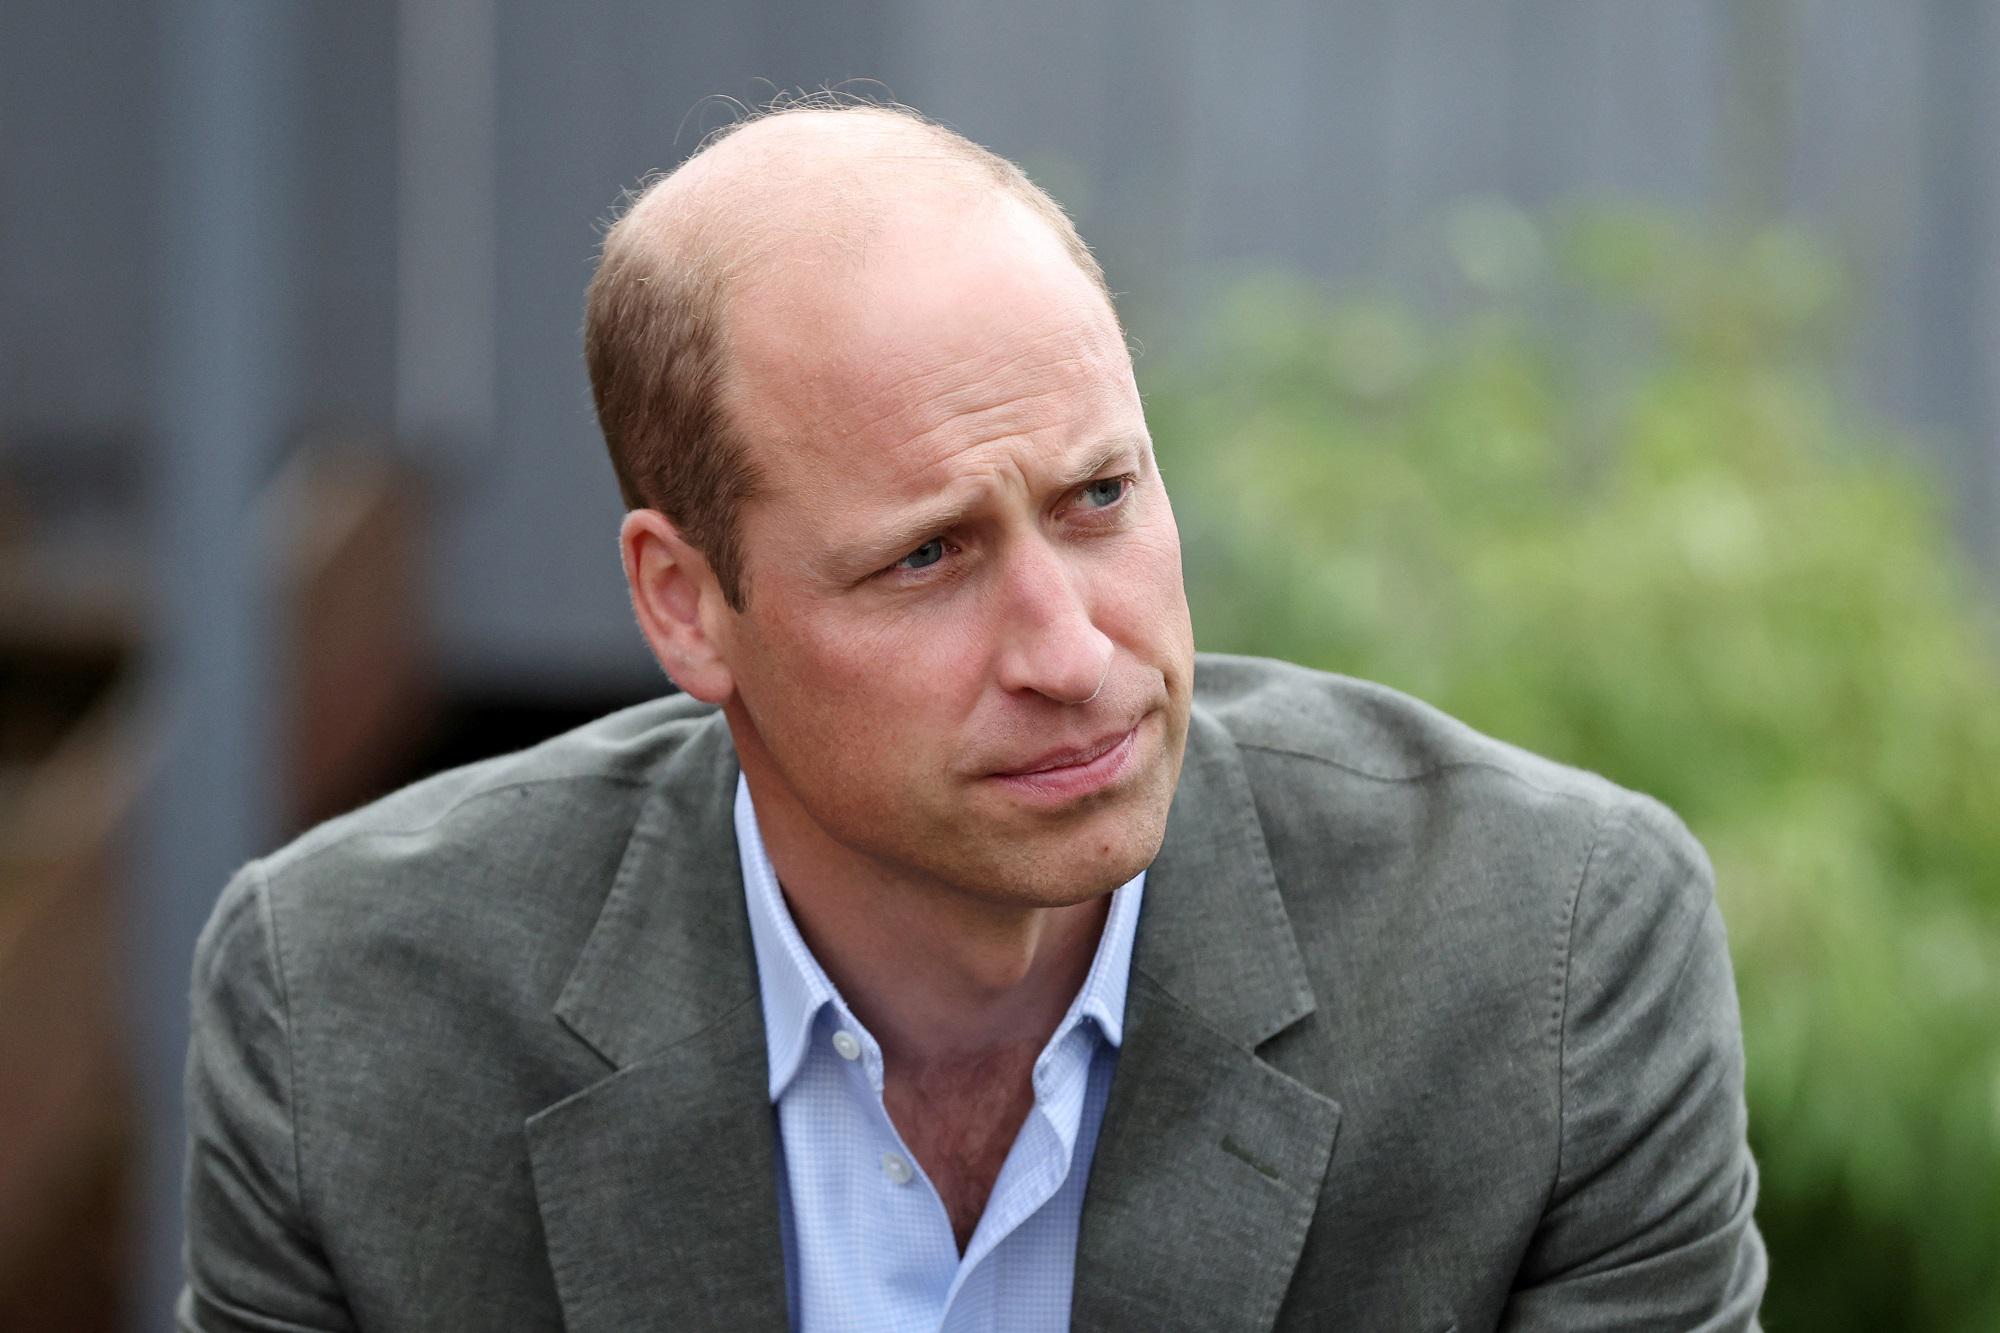 Prince William is in New York, and here’s who will be by his side